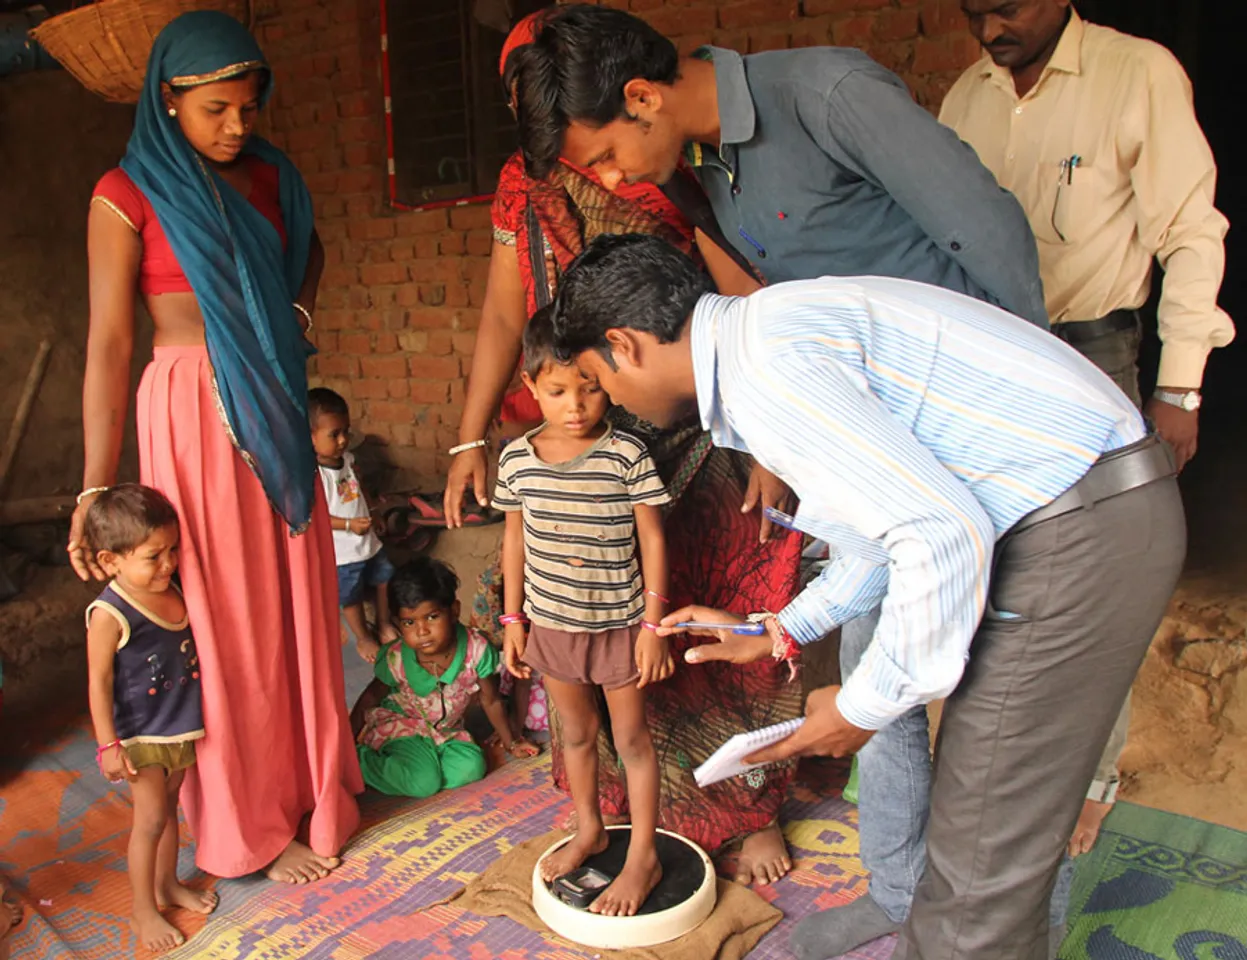 Rescuing mortgaged kids, giving tribals a voice in decision-making, how Vaagdhara is bringing change from ground up